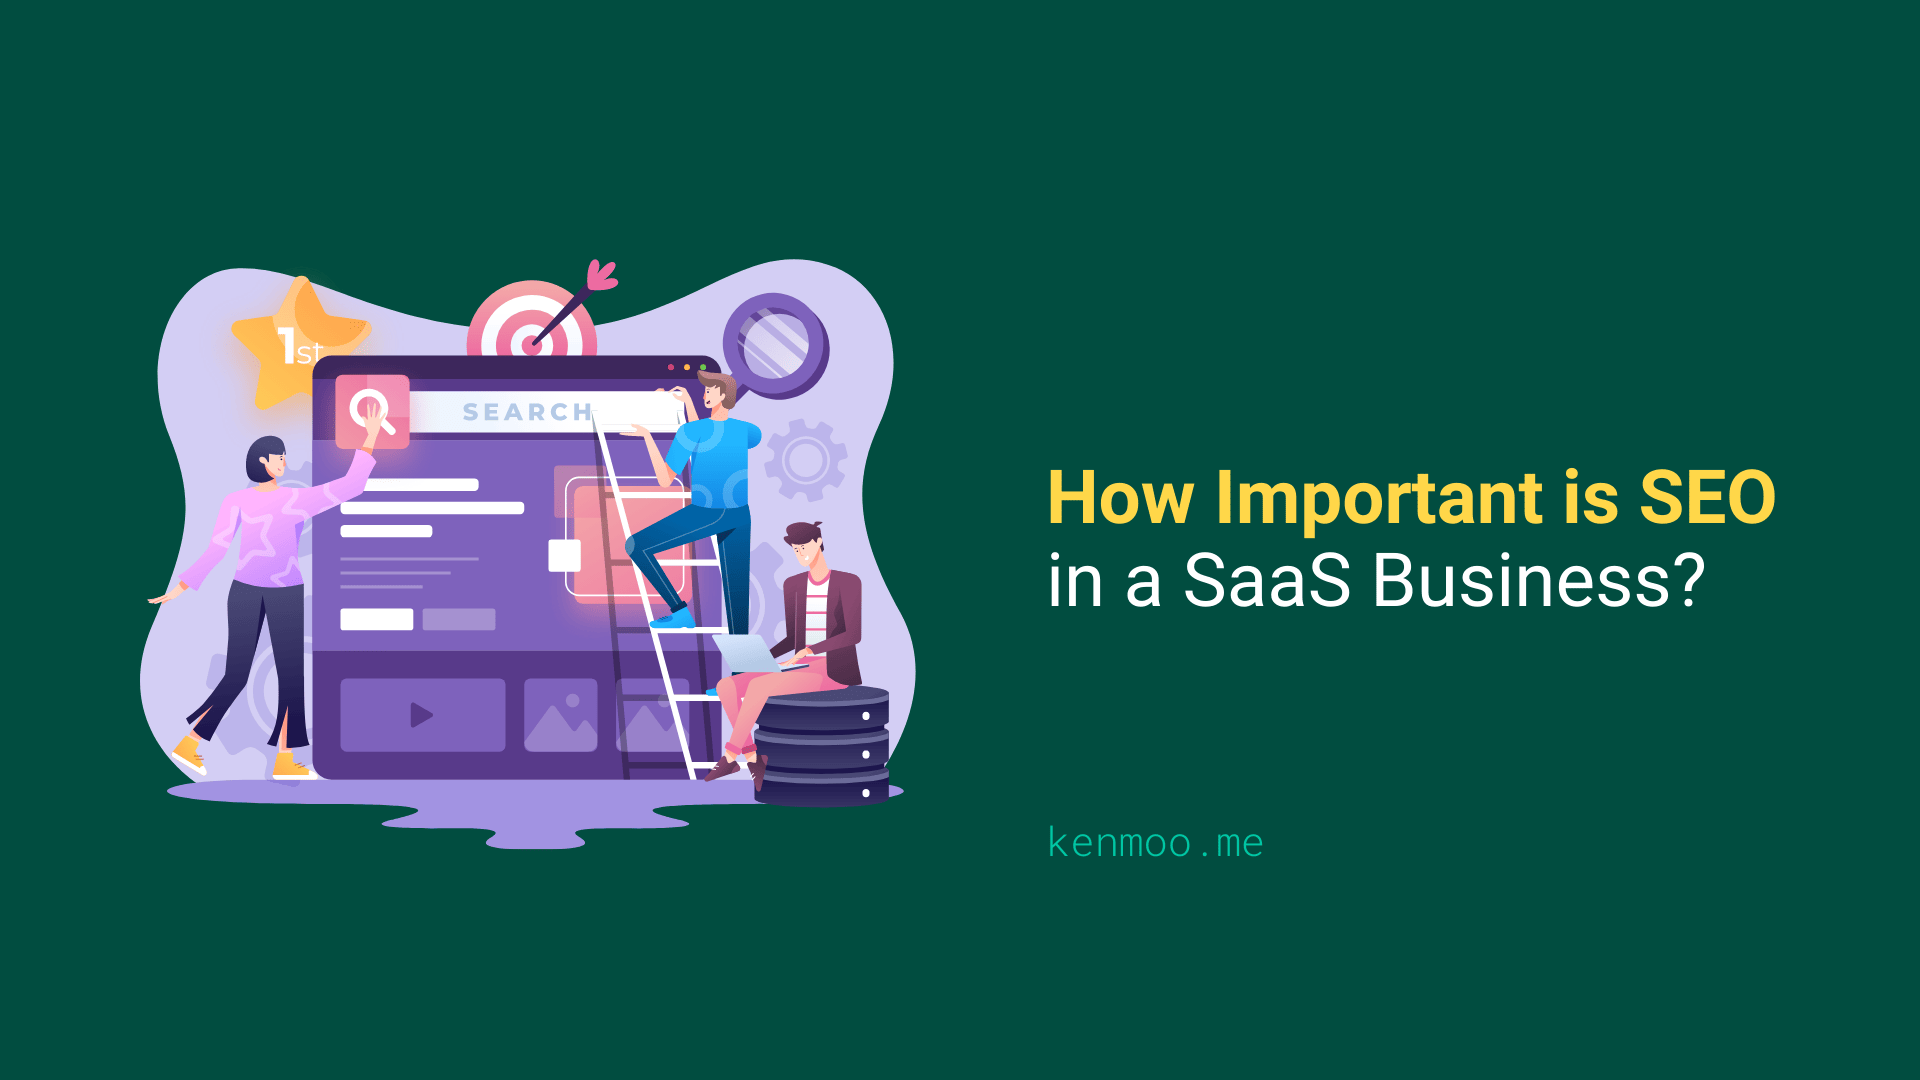 How Important is SEO in a SaaS Business?